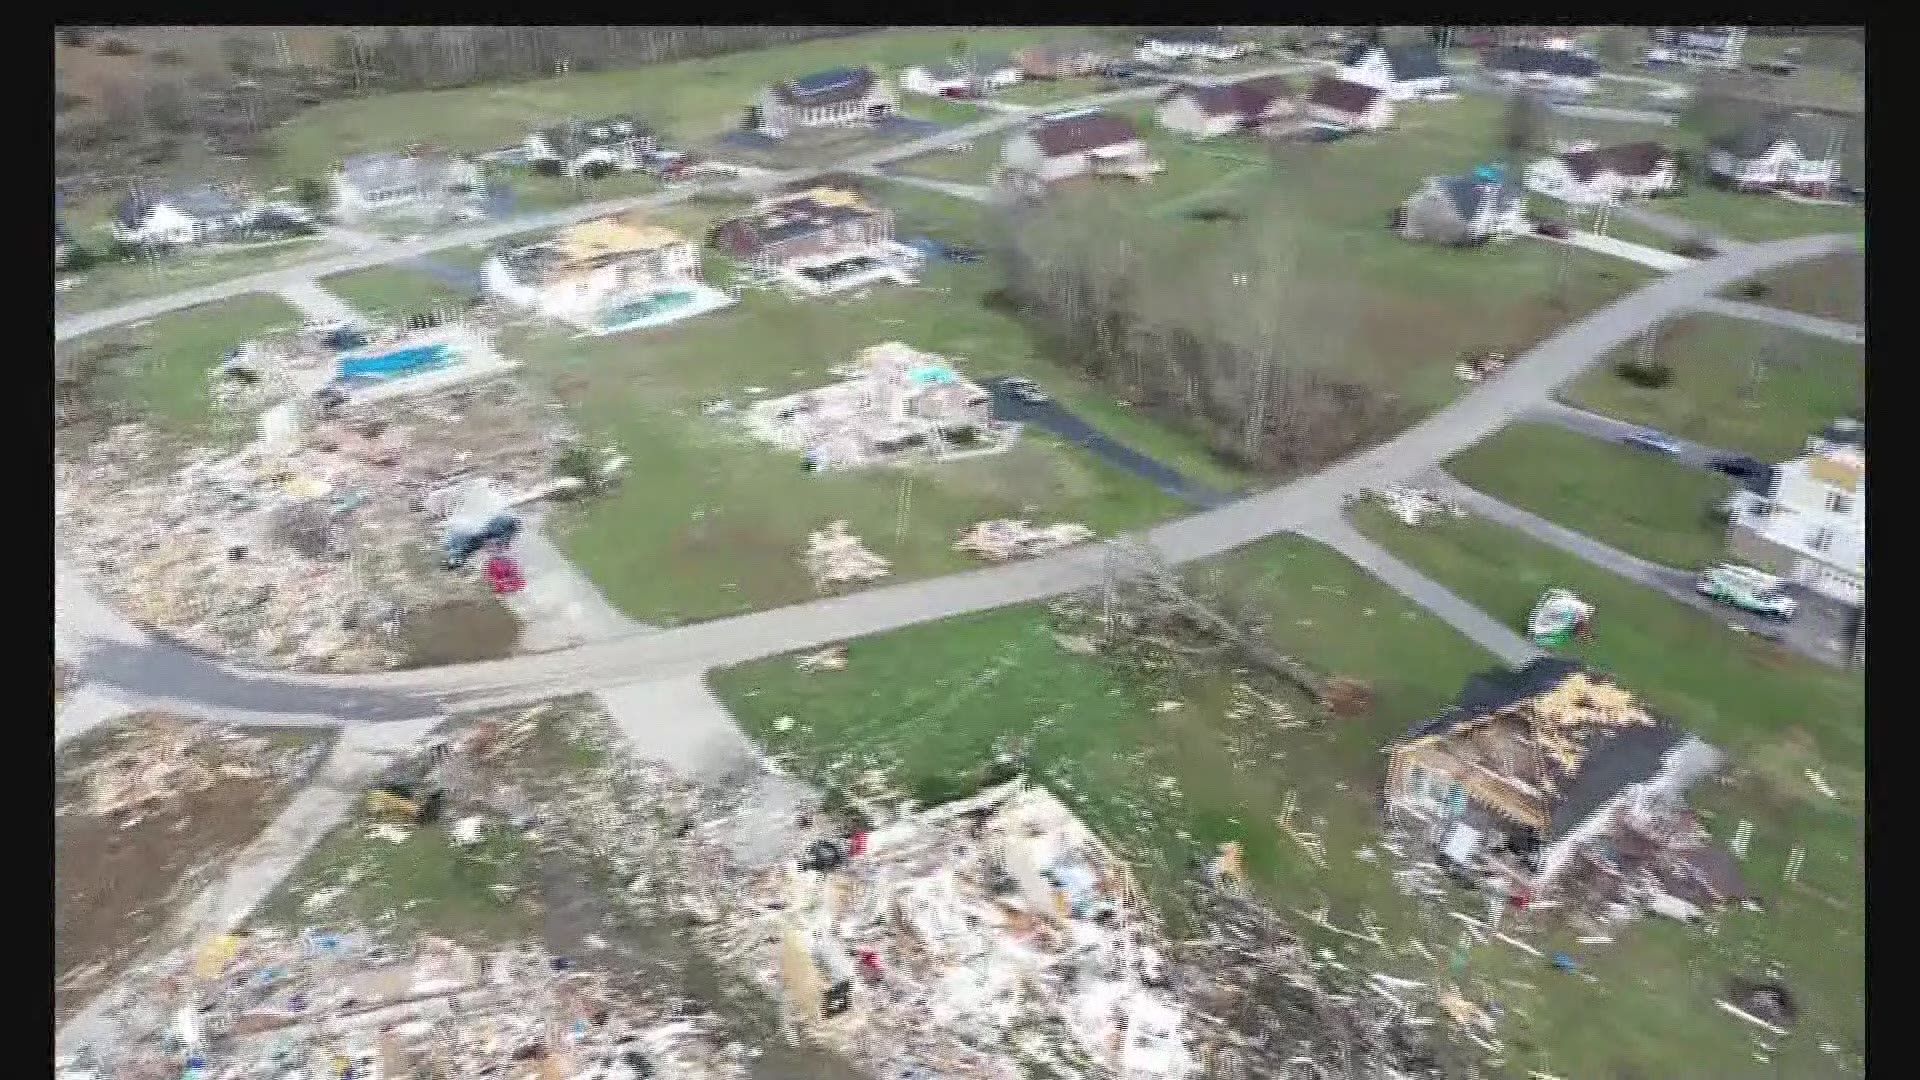 18 people were killed when a tornado struck Putnam Co, Tennessee during the early morning hours of March 3.